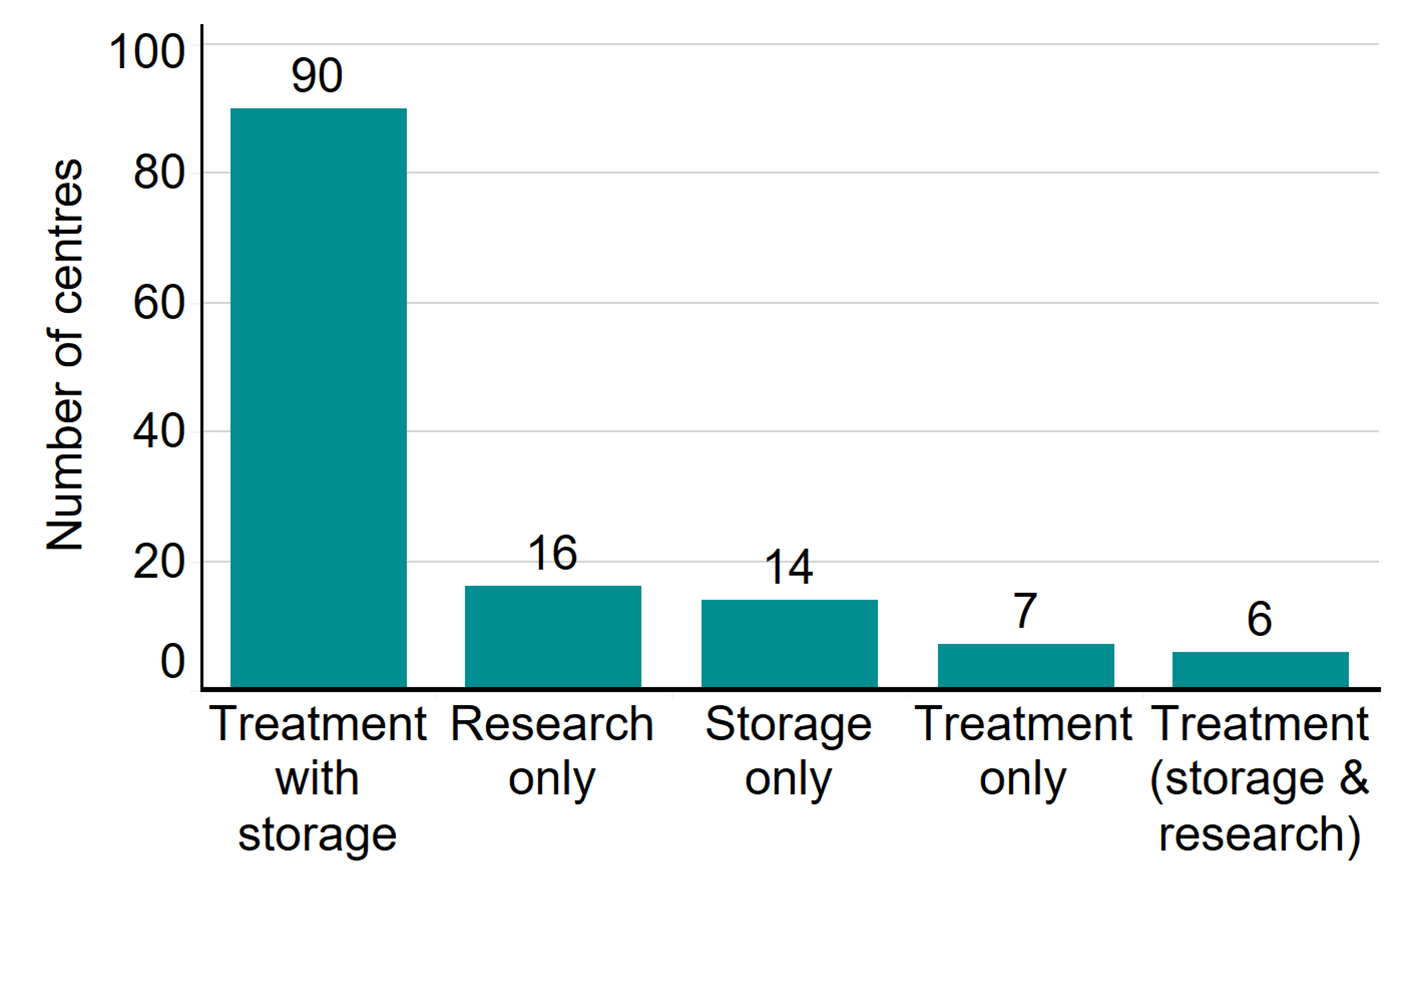 Figure 2: Number of licensed fertility clinics by type, 2020/21. Number of licensed fertility clinics by type, 2020/21. This bar chart shows the number of licensed clinics by whether they provide treatment, storage, research, or a combination, in 2020/21. 90 licensed fertility clinics offer treatment with storage, which is the most common combination. Few licensed clinics offer research, storage, or treatment only. There are only 6 licensed clinics which offer research, storage, and treatment together. An accessible form of the underlying data for this figure can be downloaded at the start of the report in .xls format.